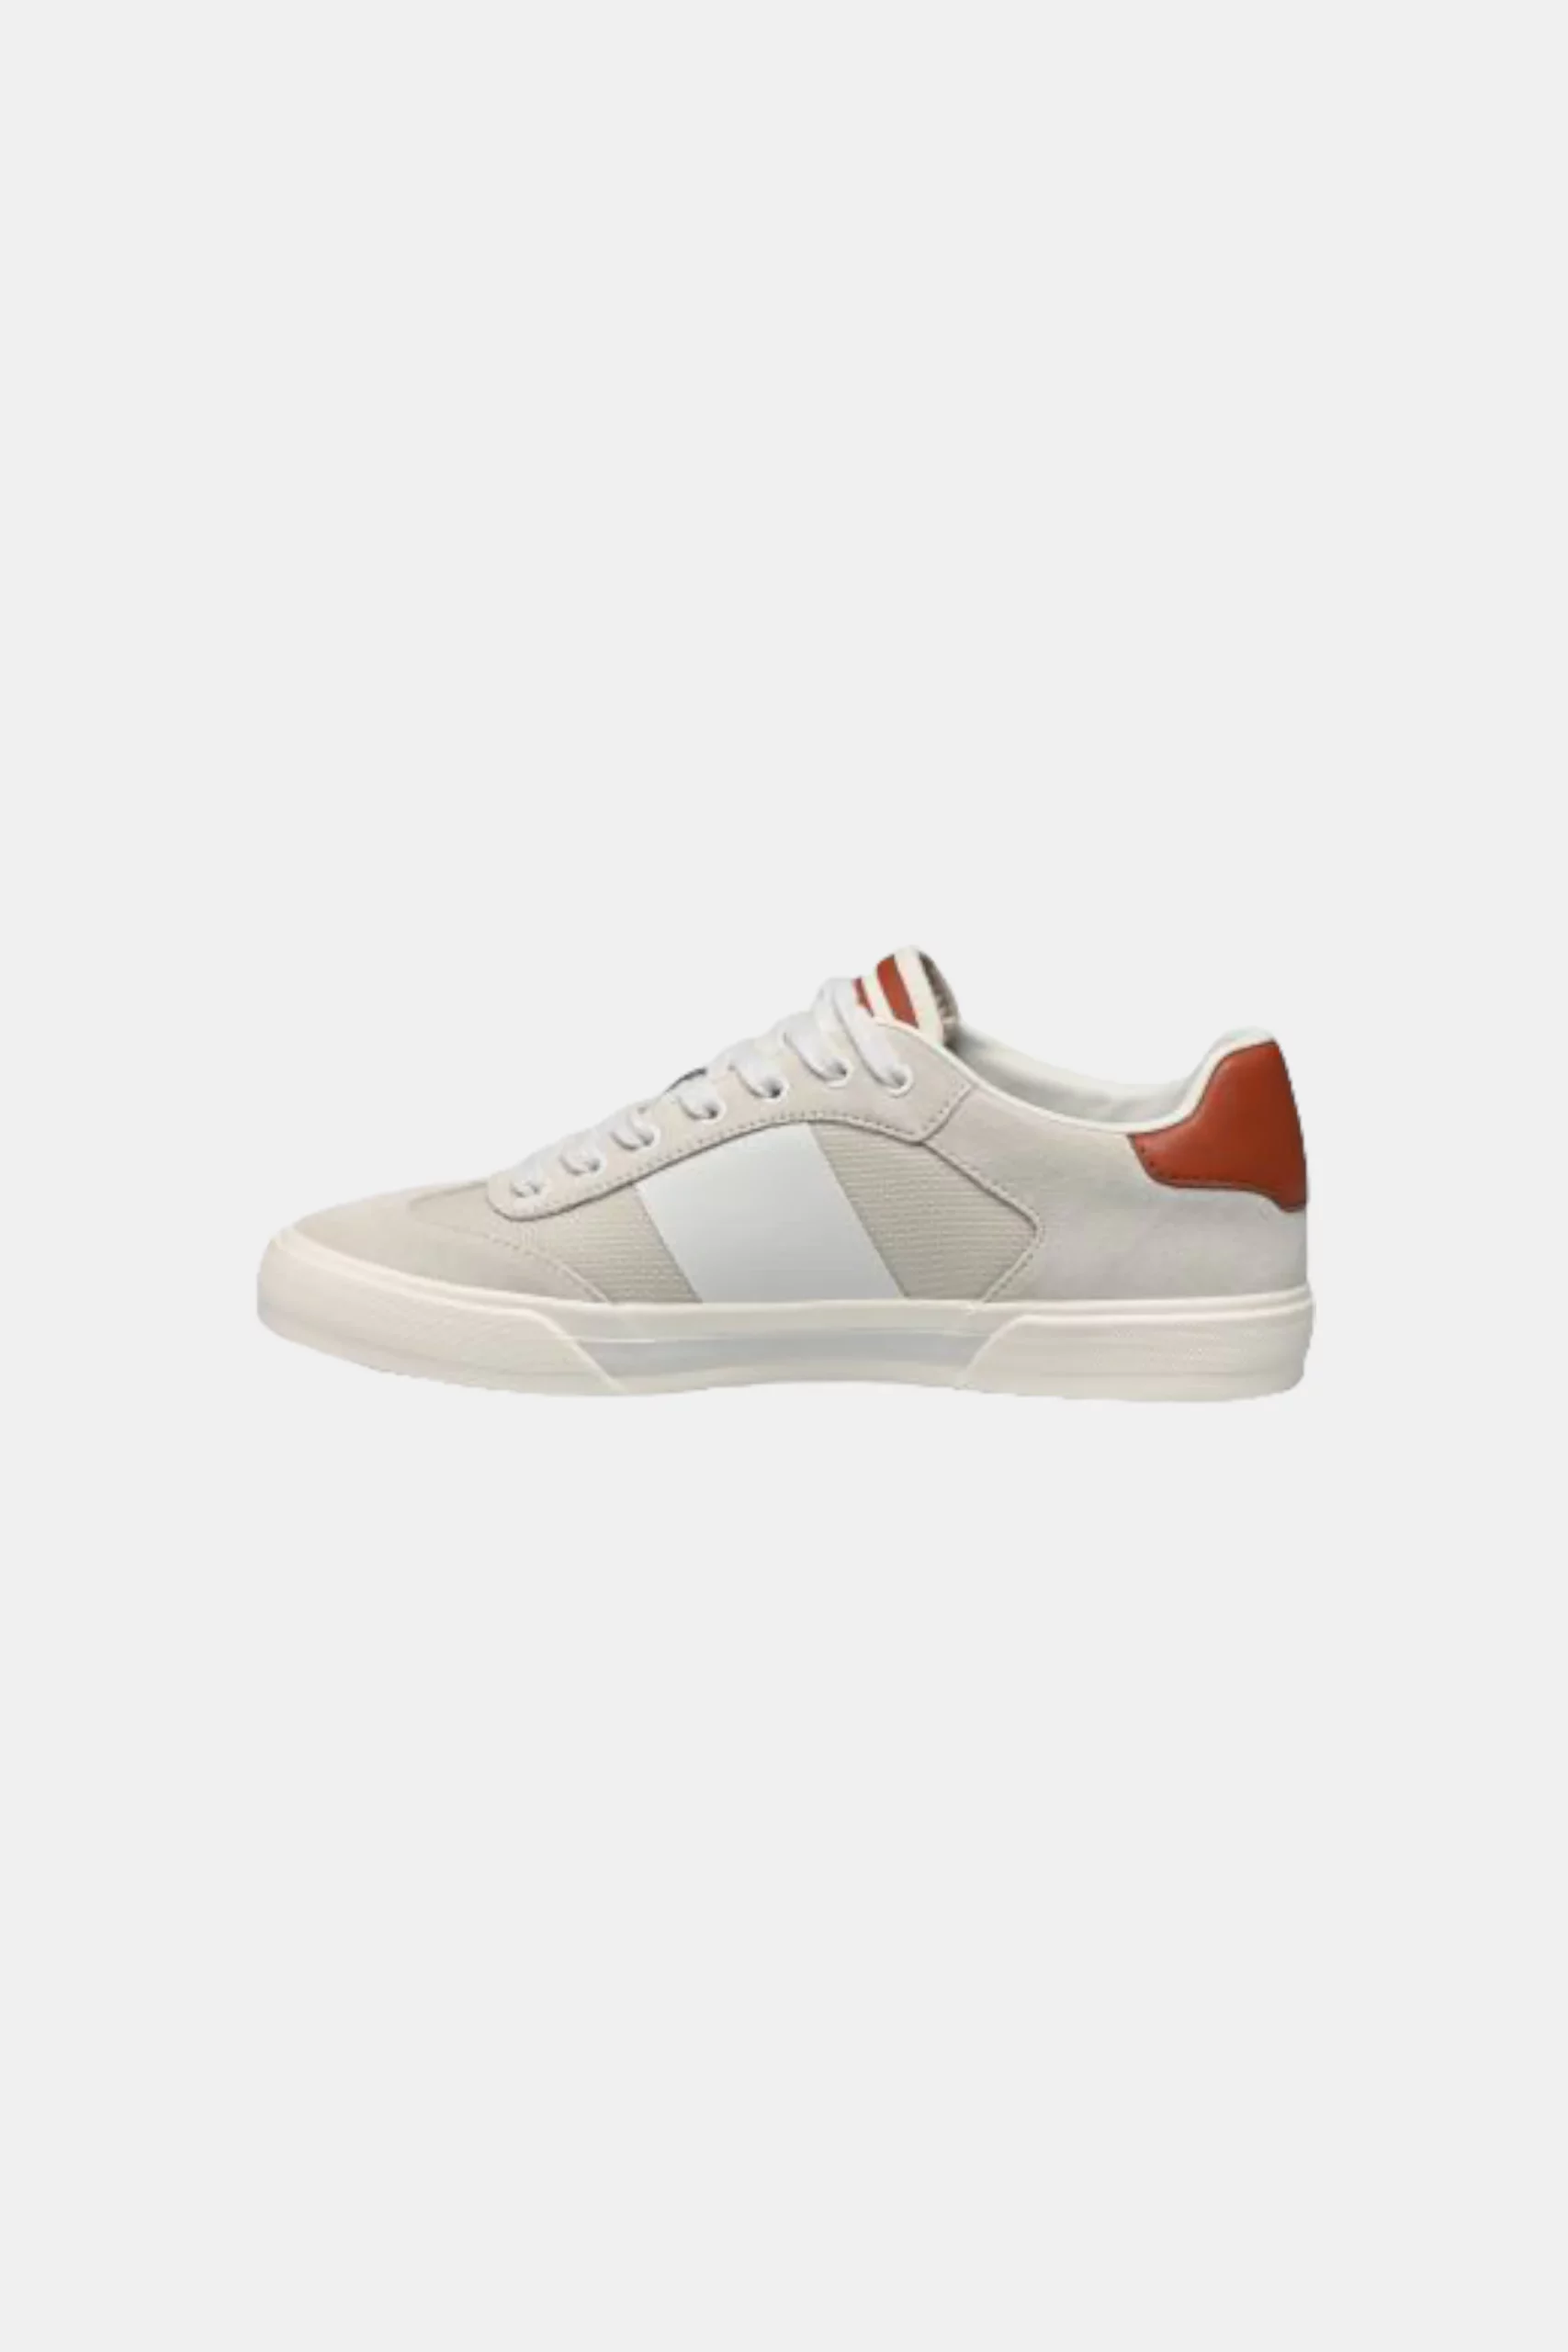 krossovki fred perry b3305 porcelain 2